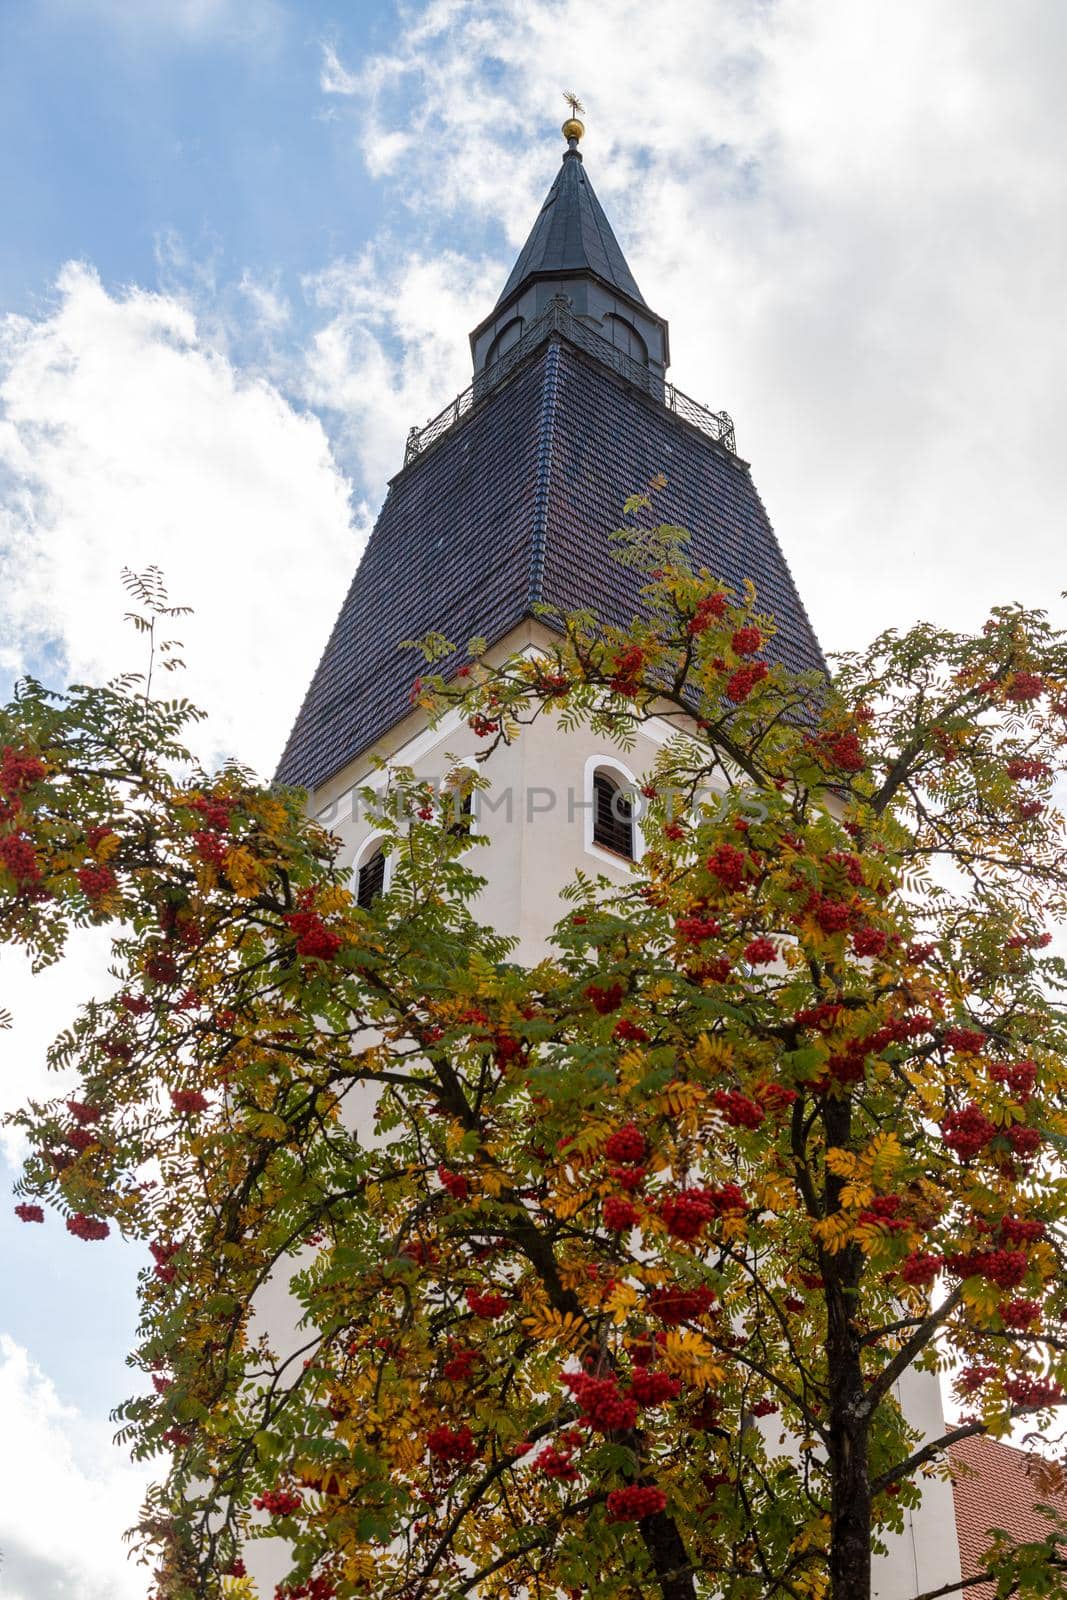 Tower of the parish church of St. Lorenz in Berching, Bavaria in autumn with multicolored tree in foreground at a sunny day